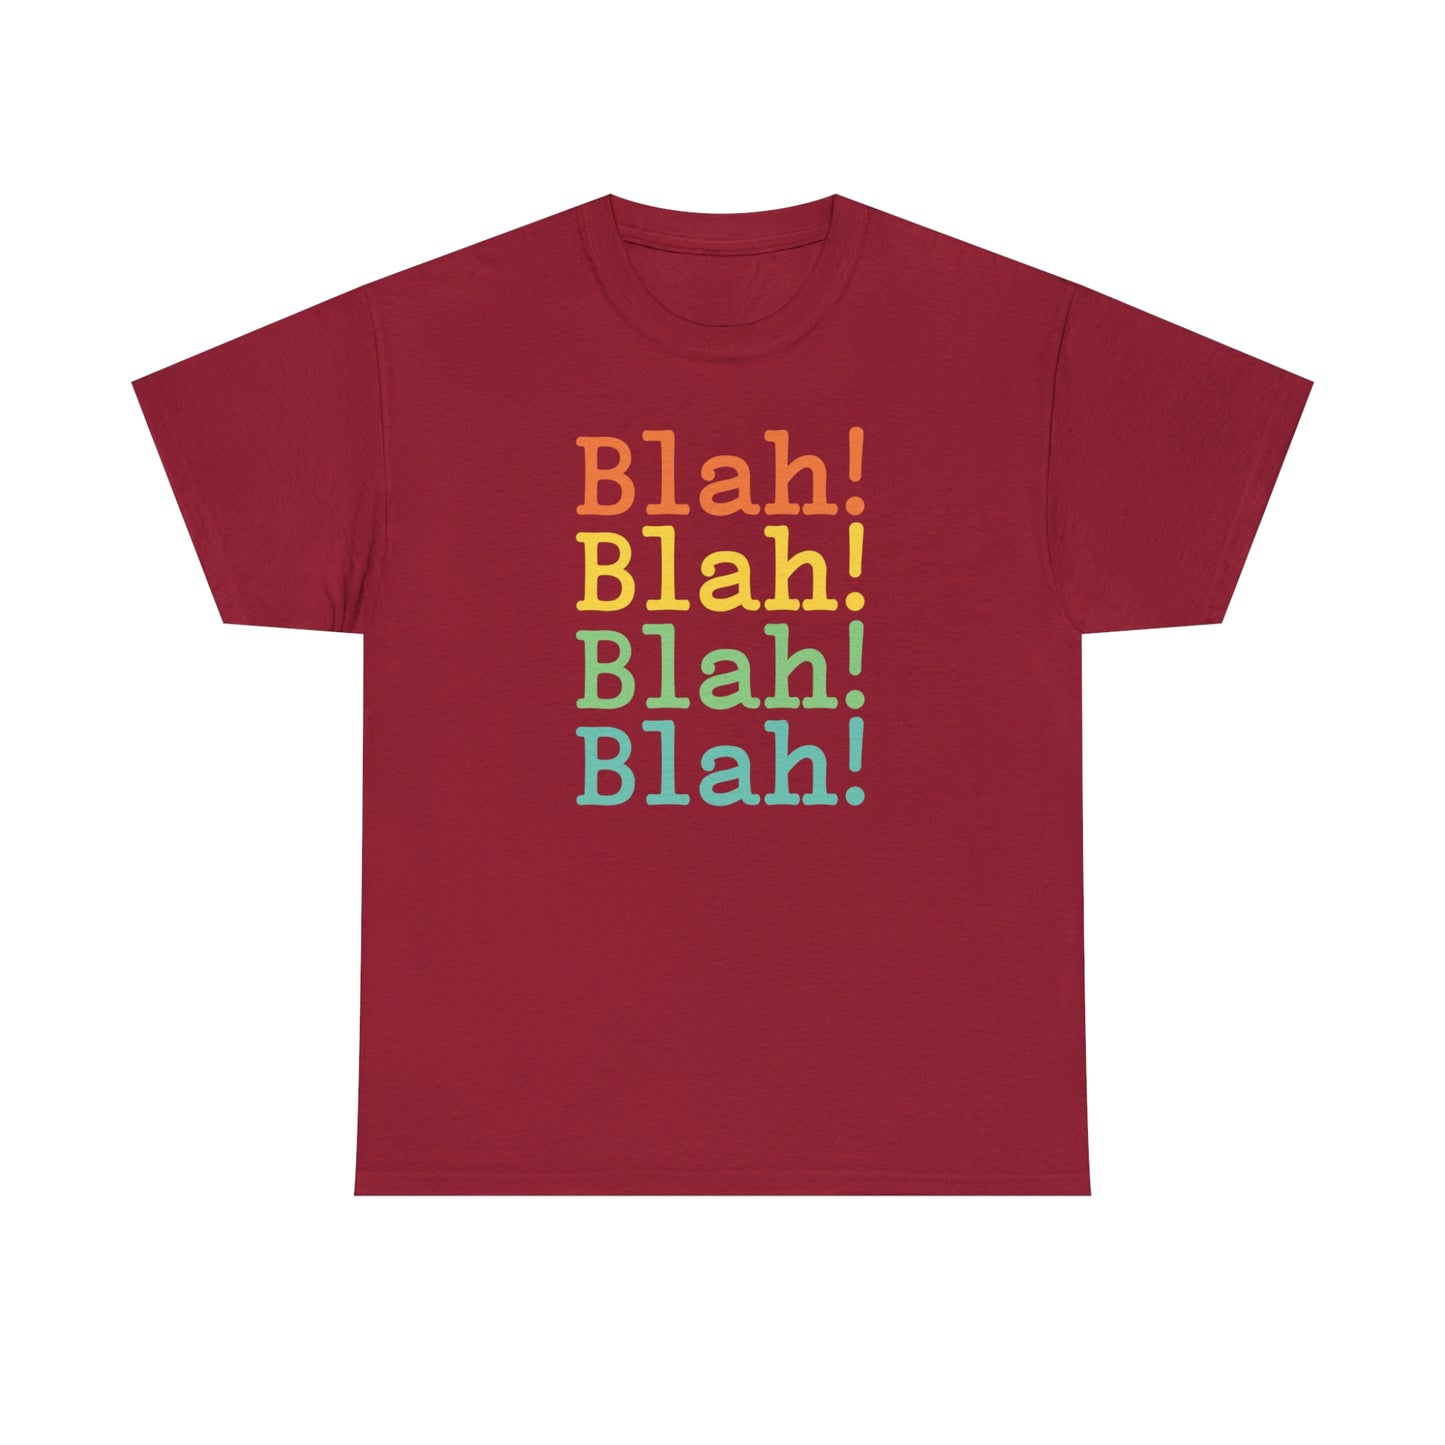 Blah Blah T-Shirt With Sarcastic Comment TShirt Funny Saying T Shirt For Not Listening Shirt For Silly Quote Gift T-Shirt